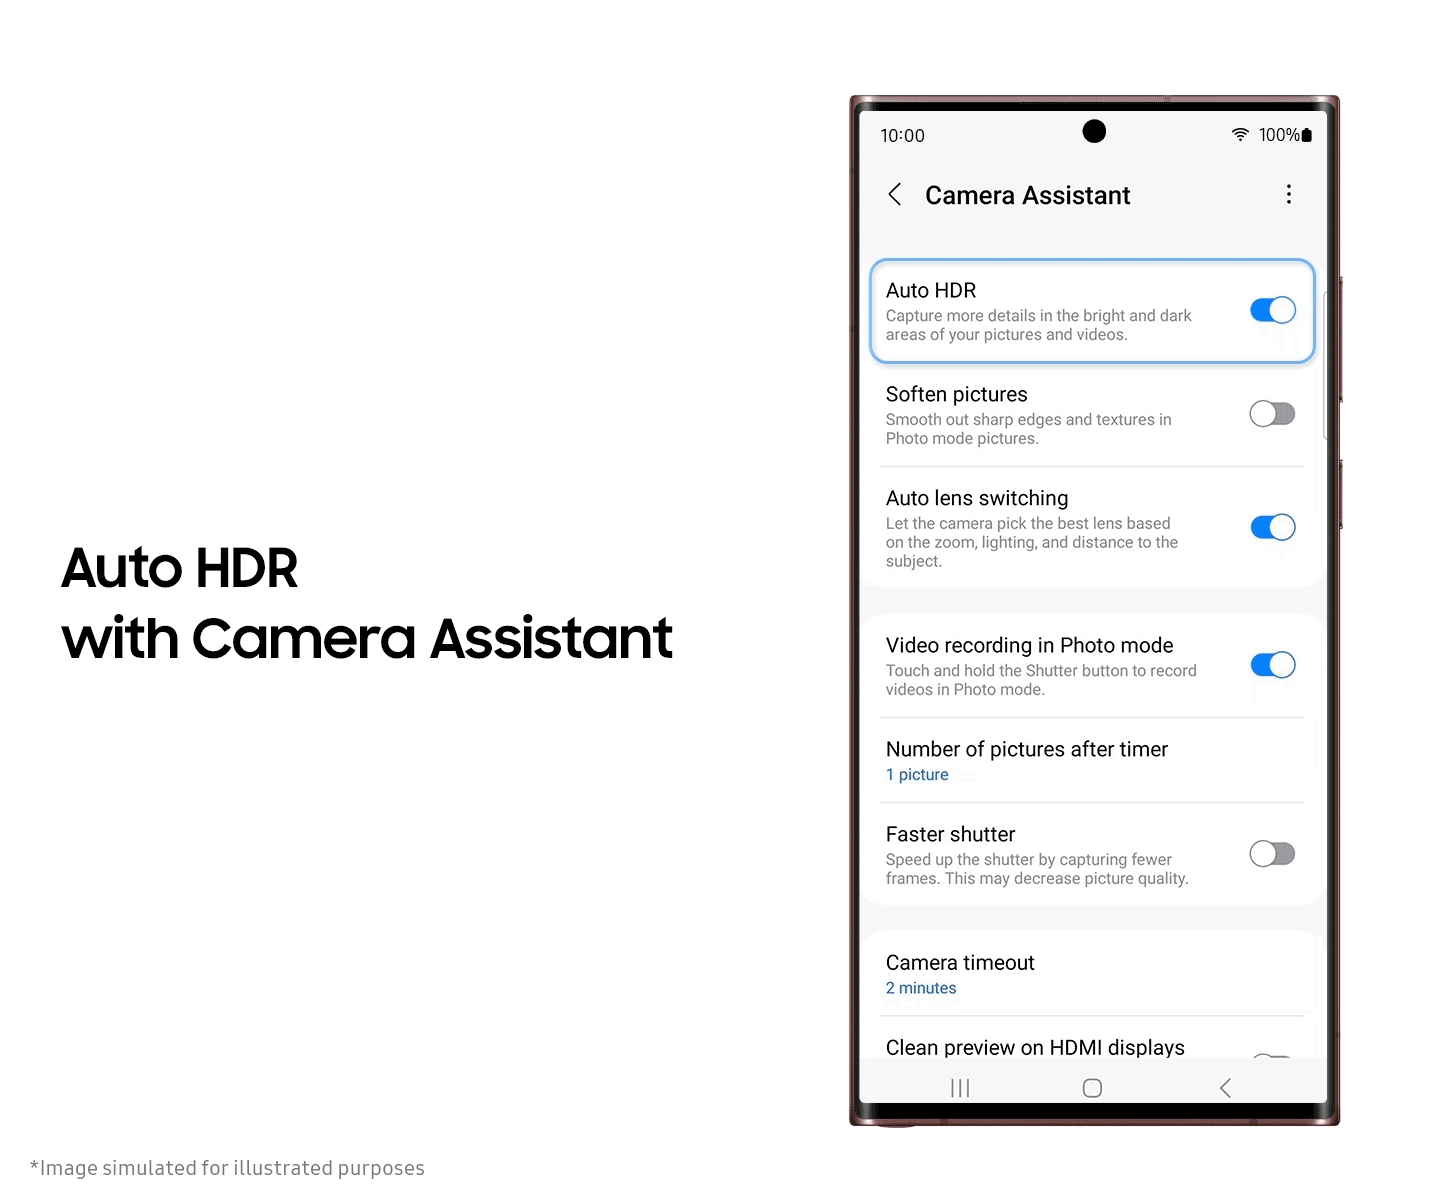 Auto HDR with Camera Assistant